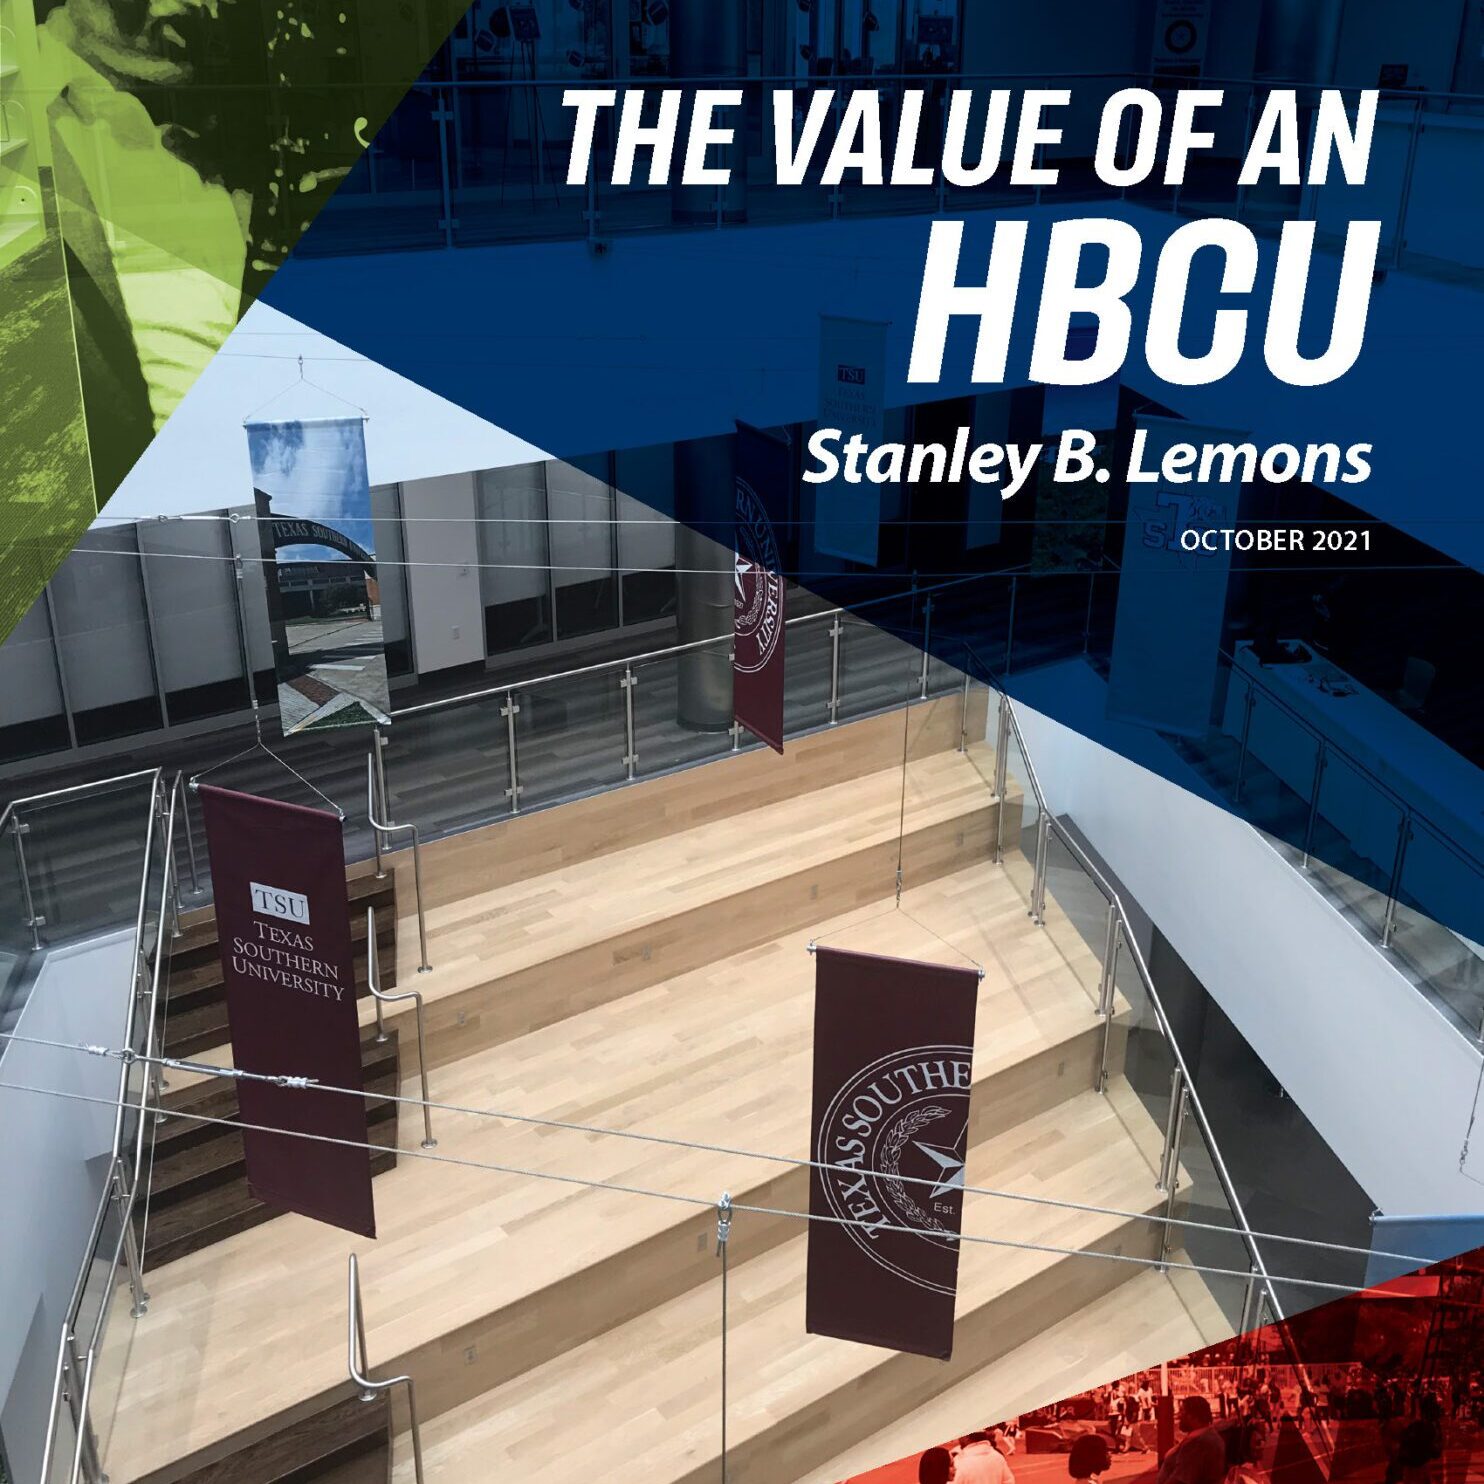 A picture of the cover of the value of an hbcu.